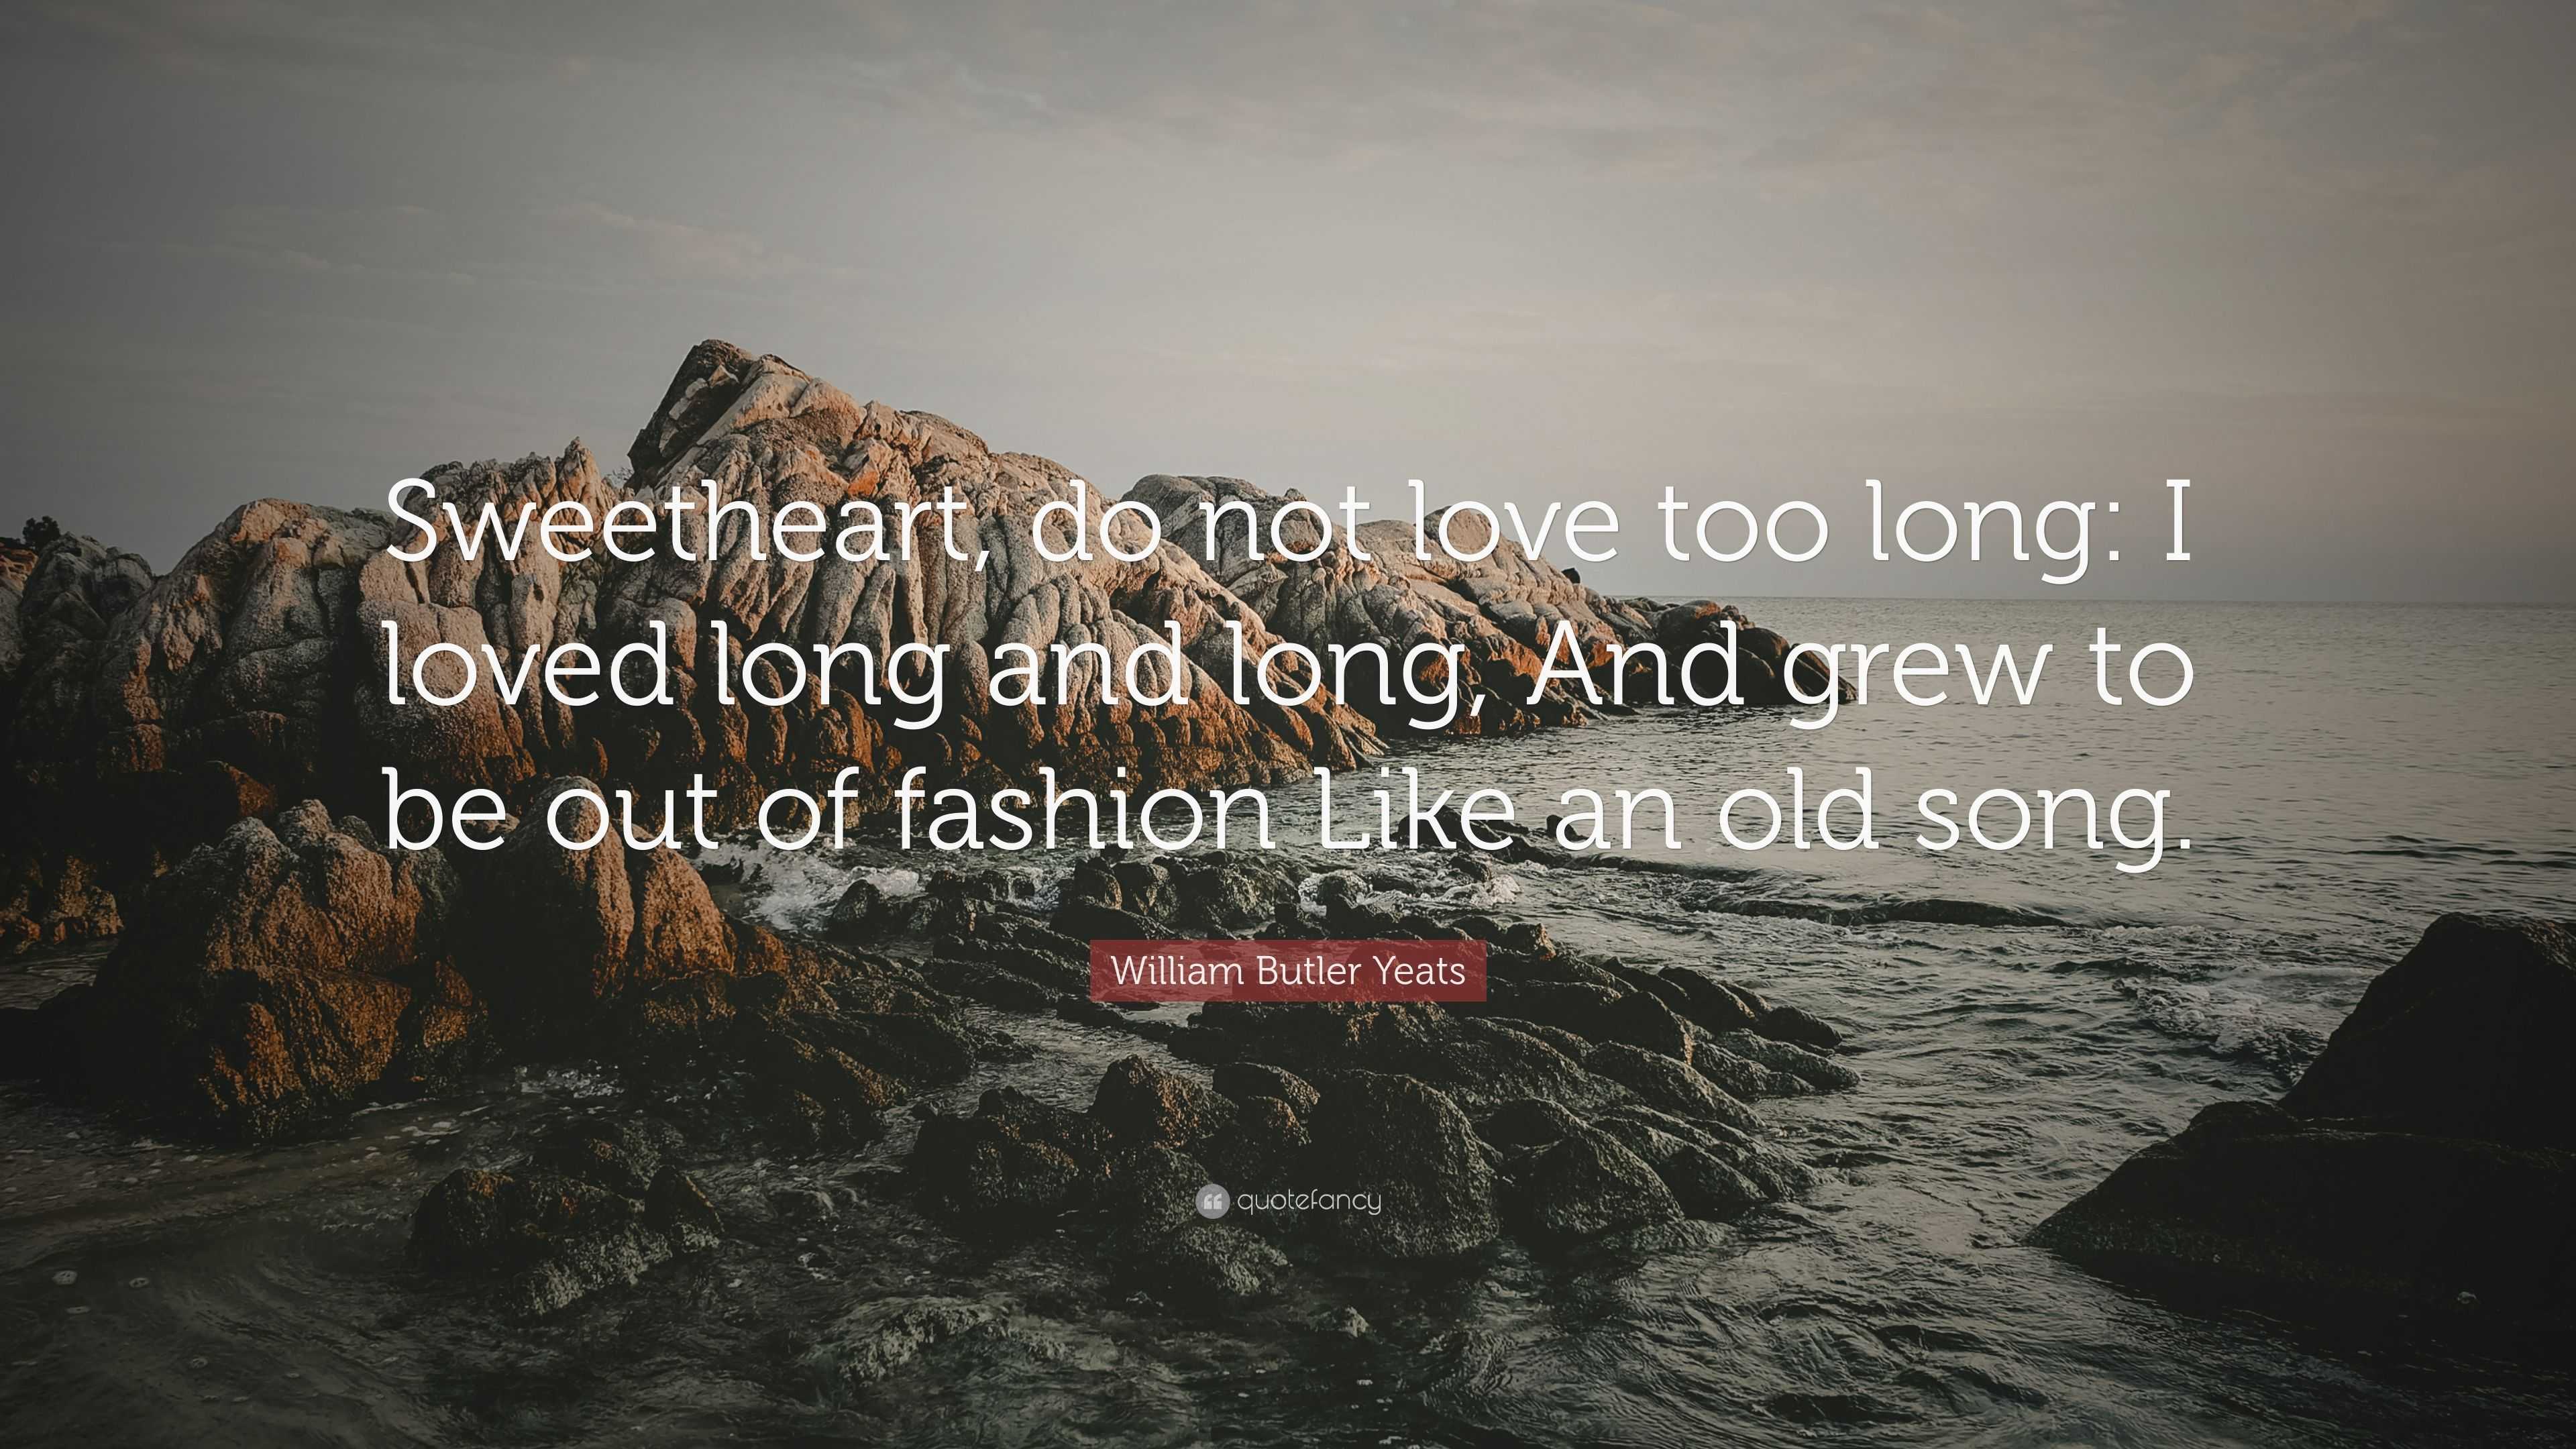 William Butler Yeats Quote “Sweetheart, do not love too long I loved